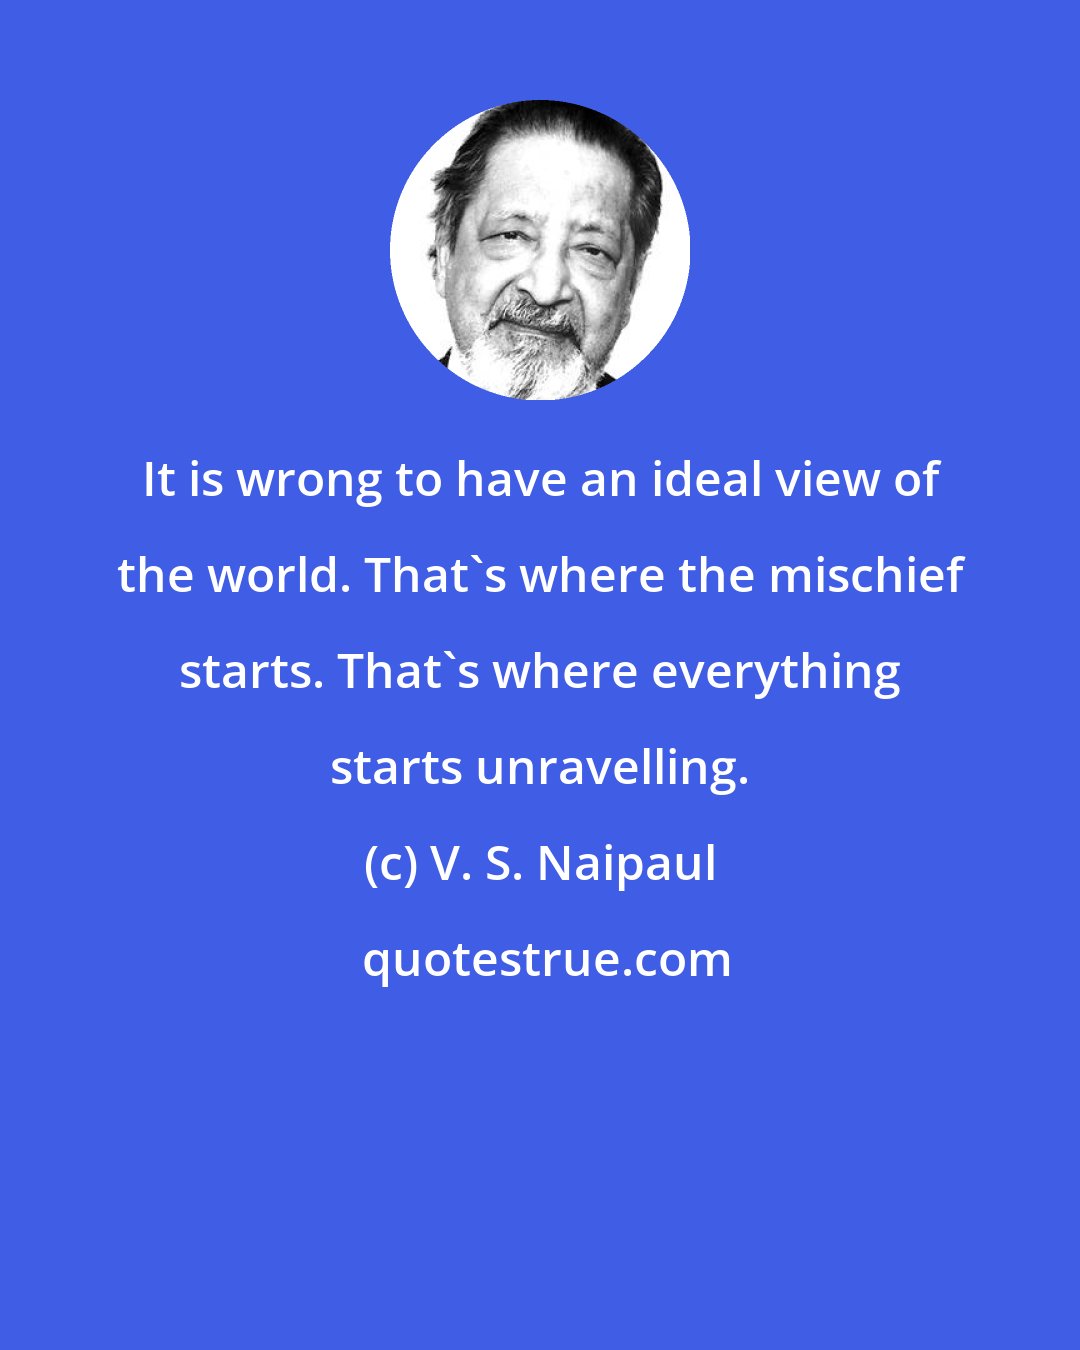 V. S. Naipaul: It is wrong to have an ideal view of the world. That's where the mischief starts. That's where everything starts unravelling.